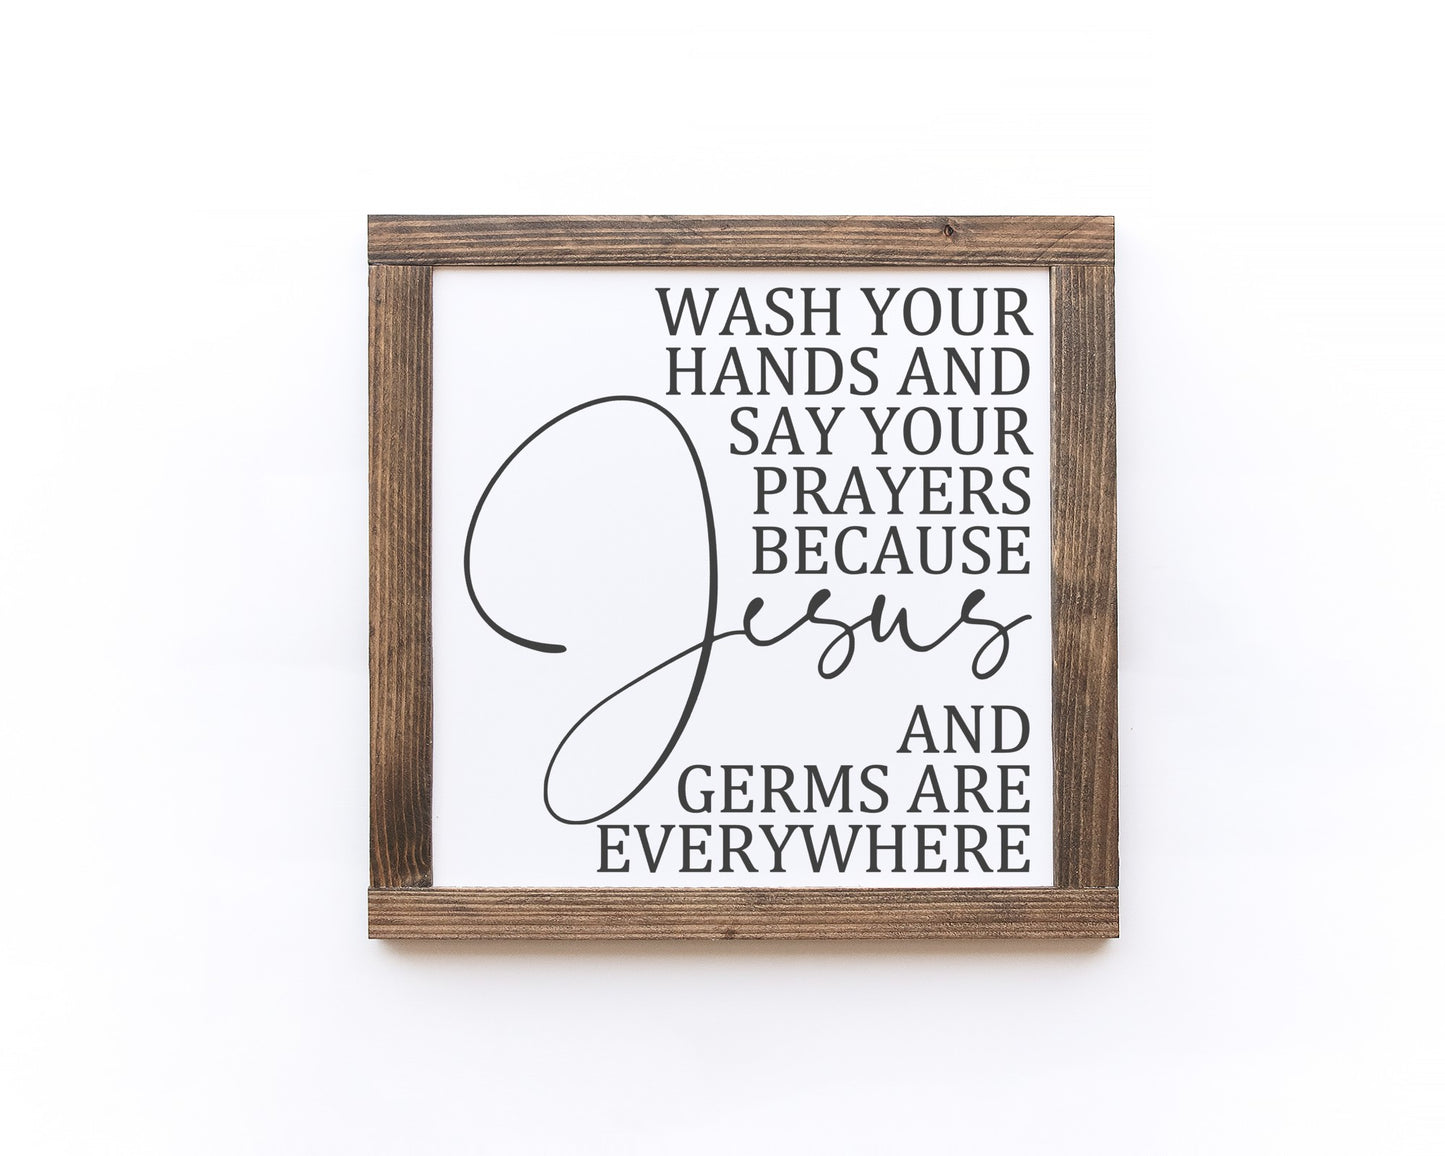 Wash Your Hands And Say Your Prayers Because Jesus And Germs Are Everywhere Wood Sign